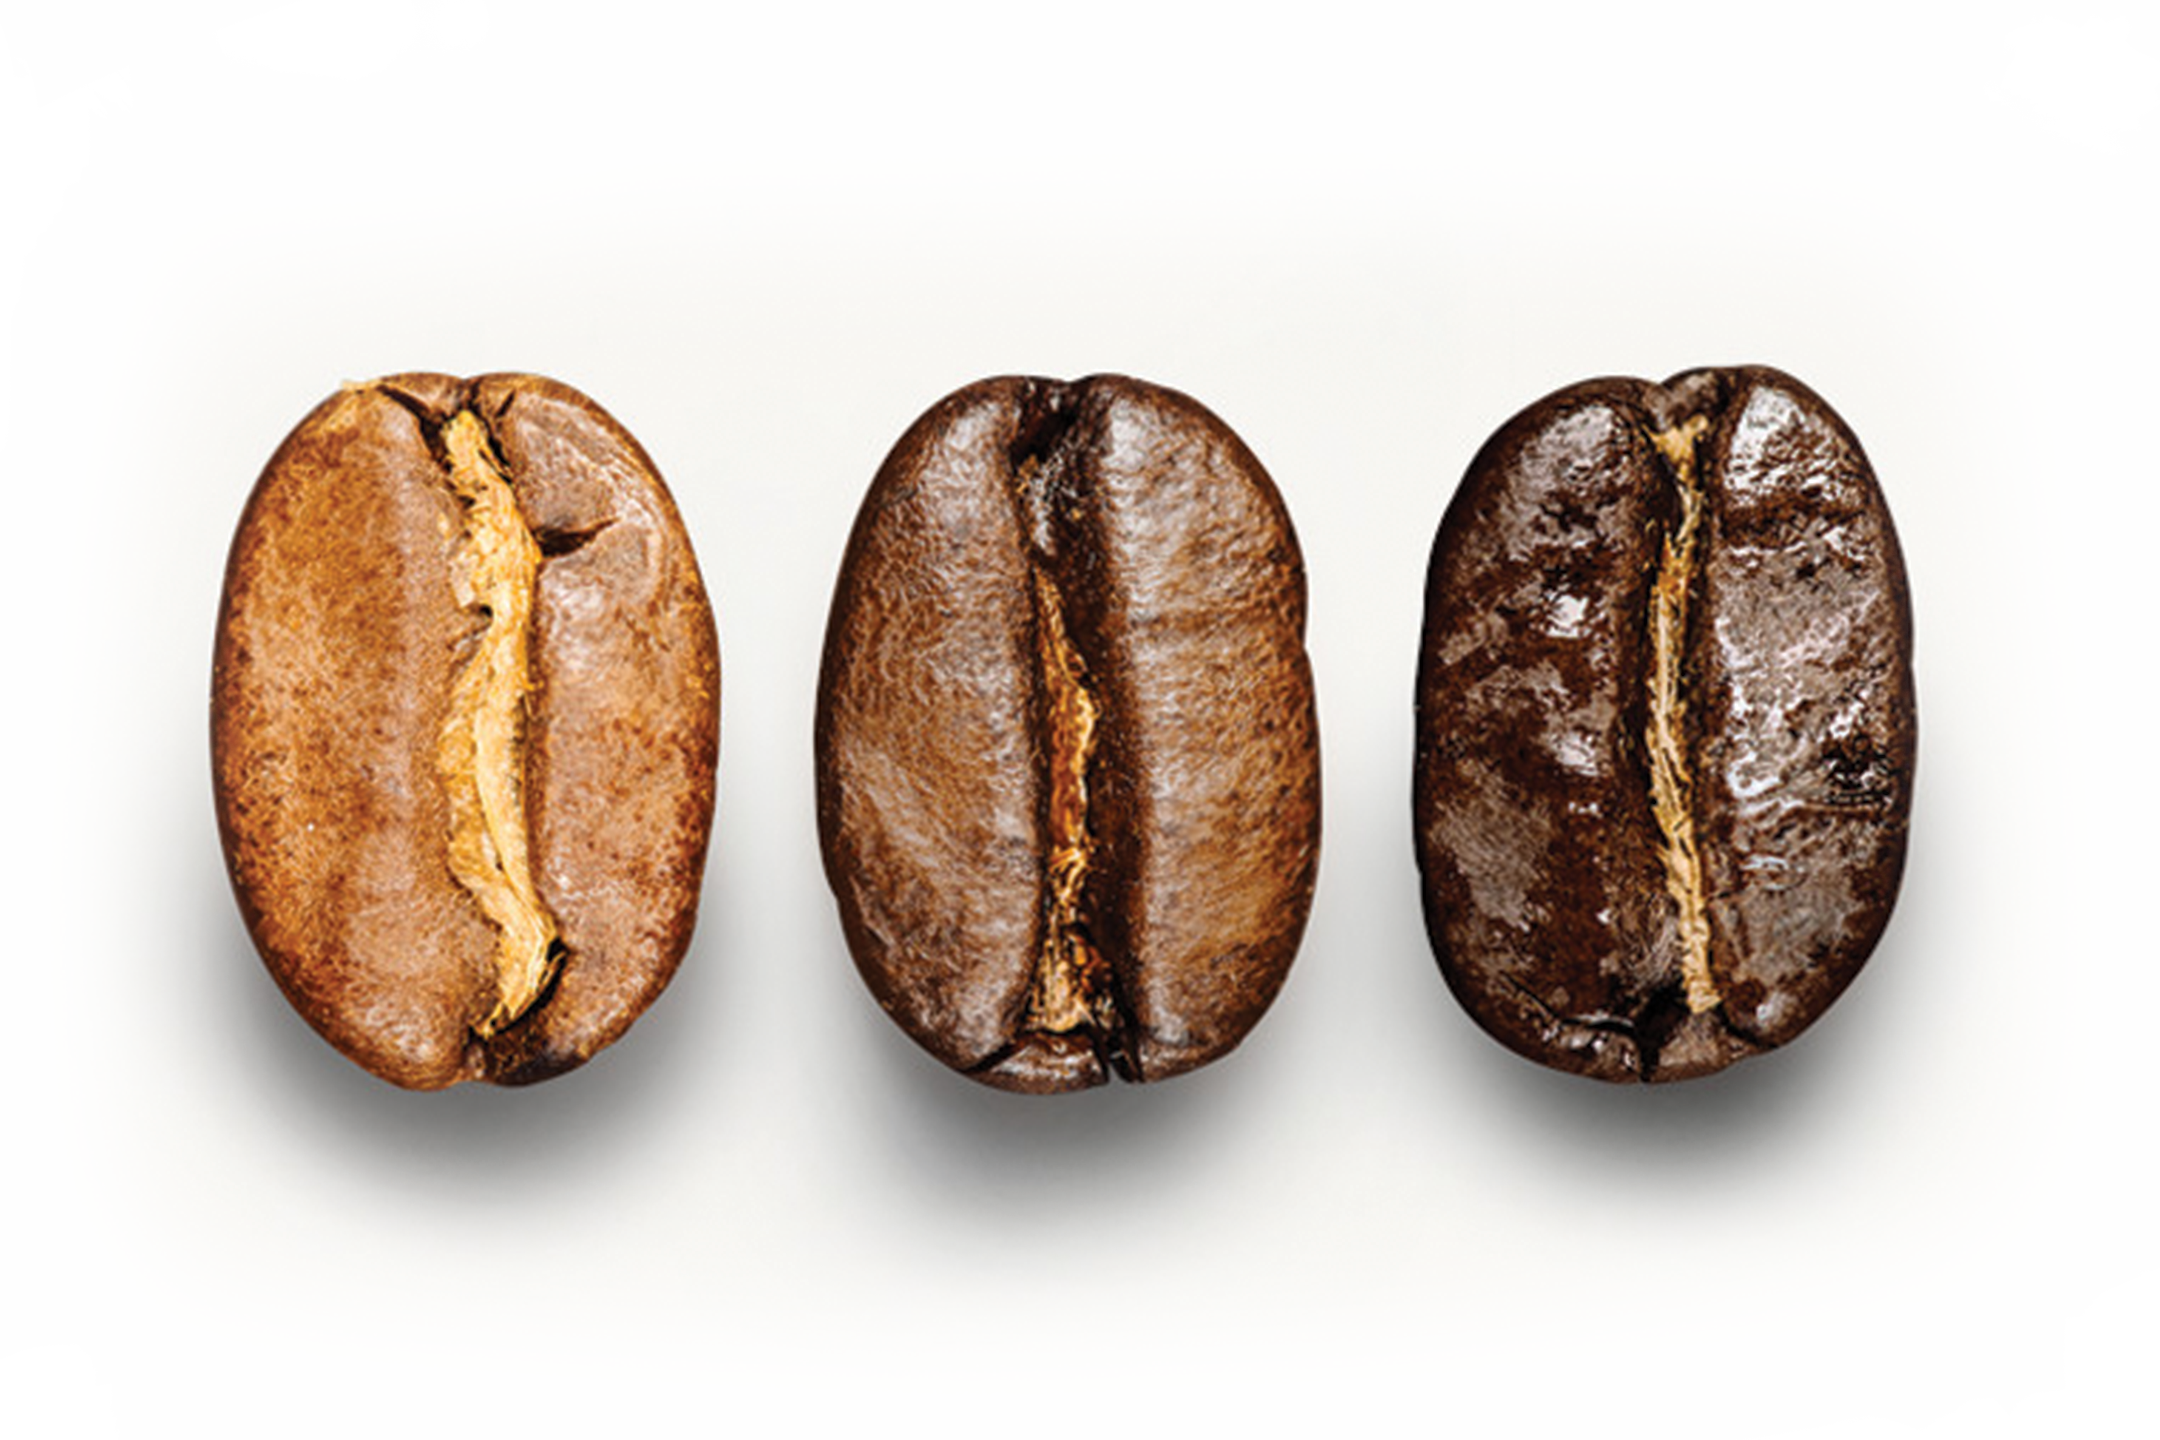 coffee bean, starbucks logo, meat Free Unlimited PNG download